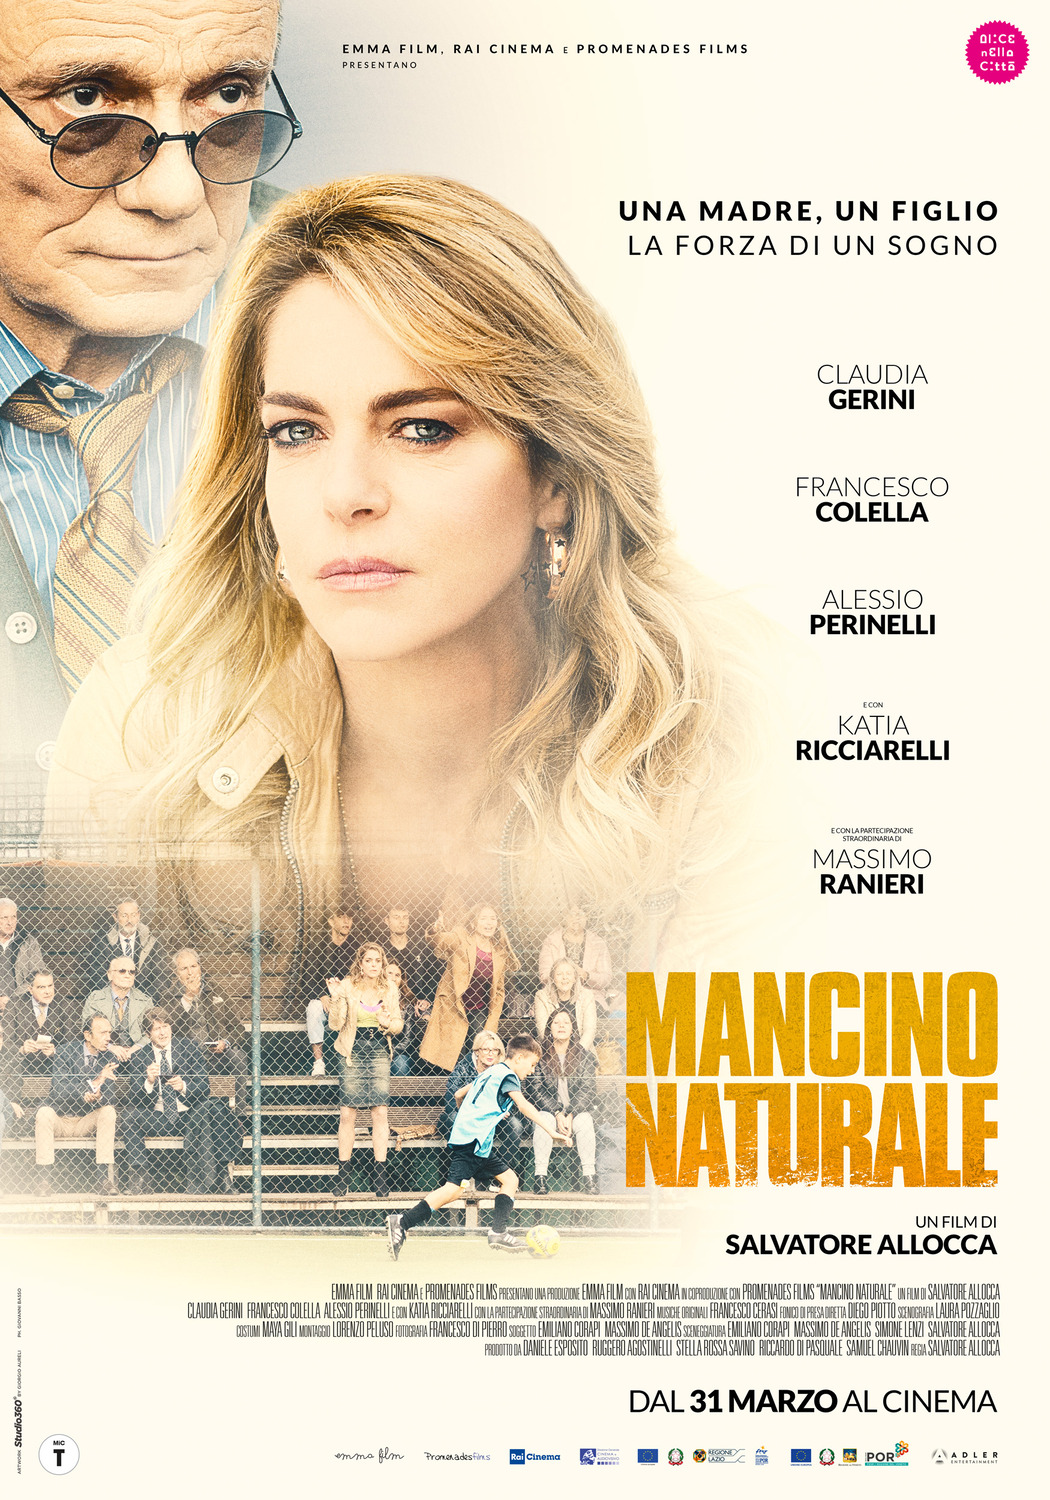 Extra Large Movie Poster Image for Mancino naturale 